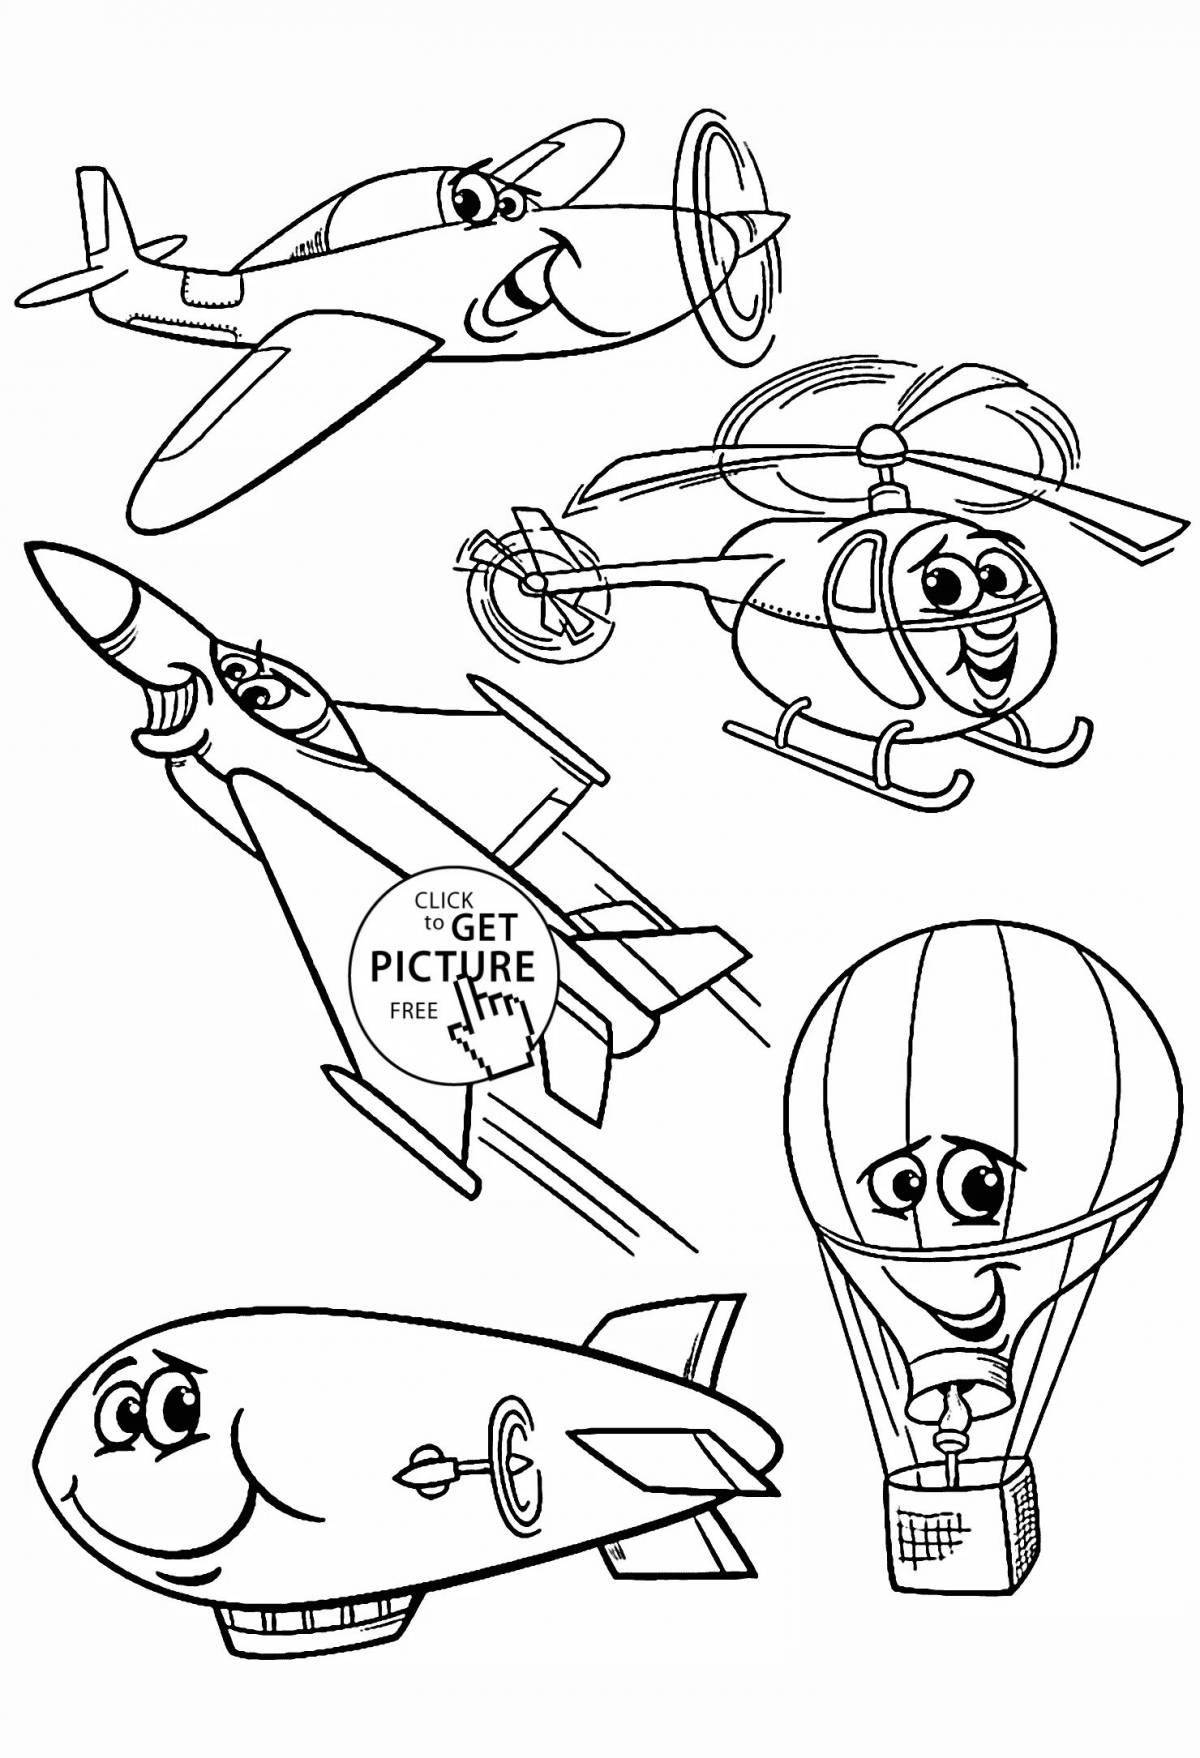 A fun air transport coloring book for 6-7 year olds